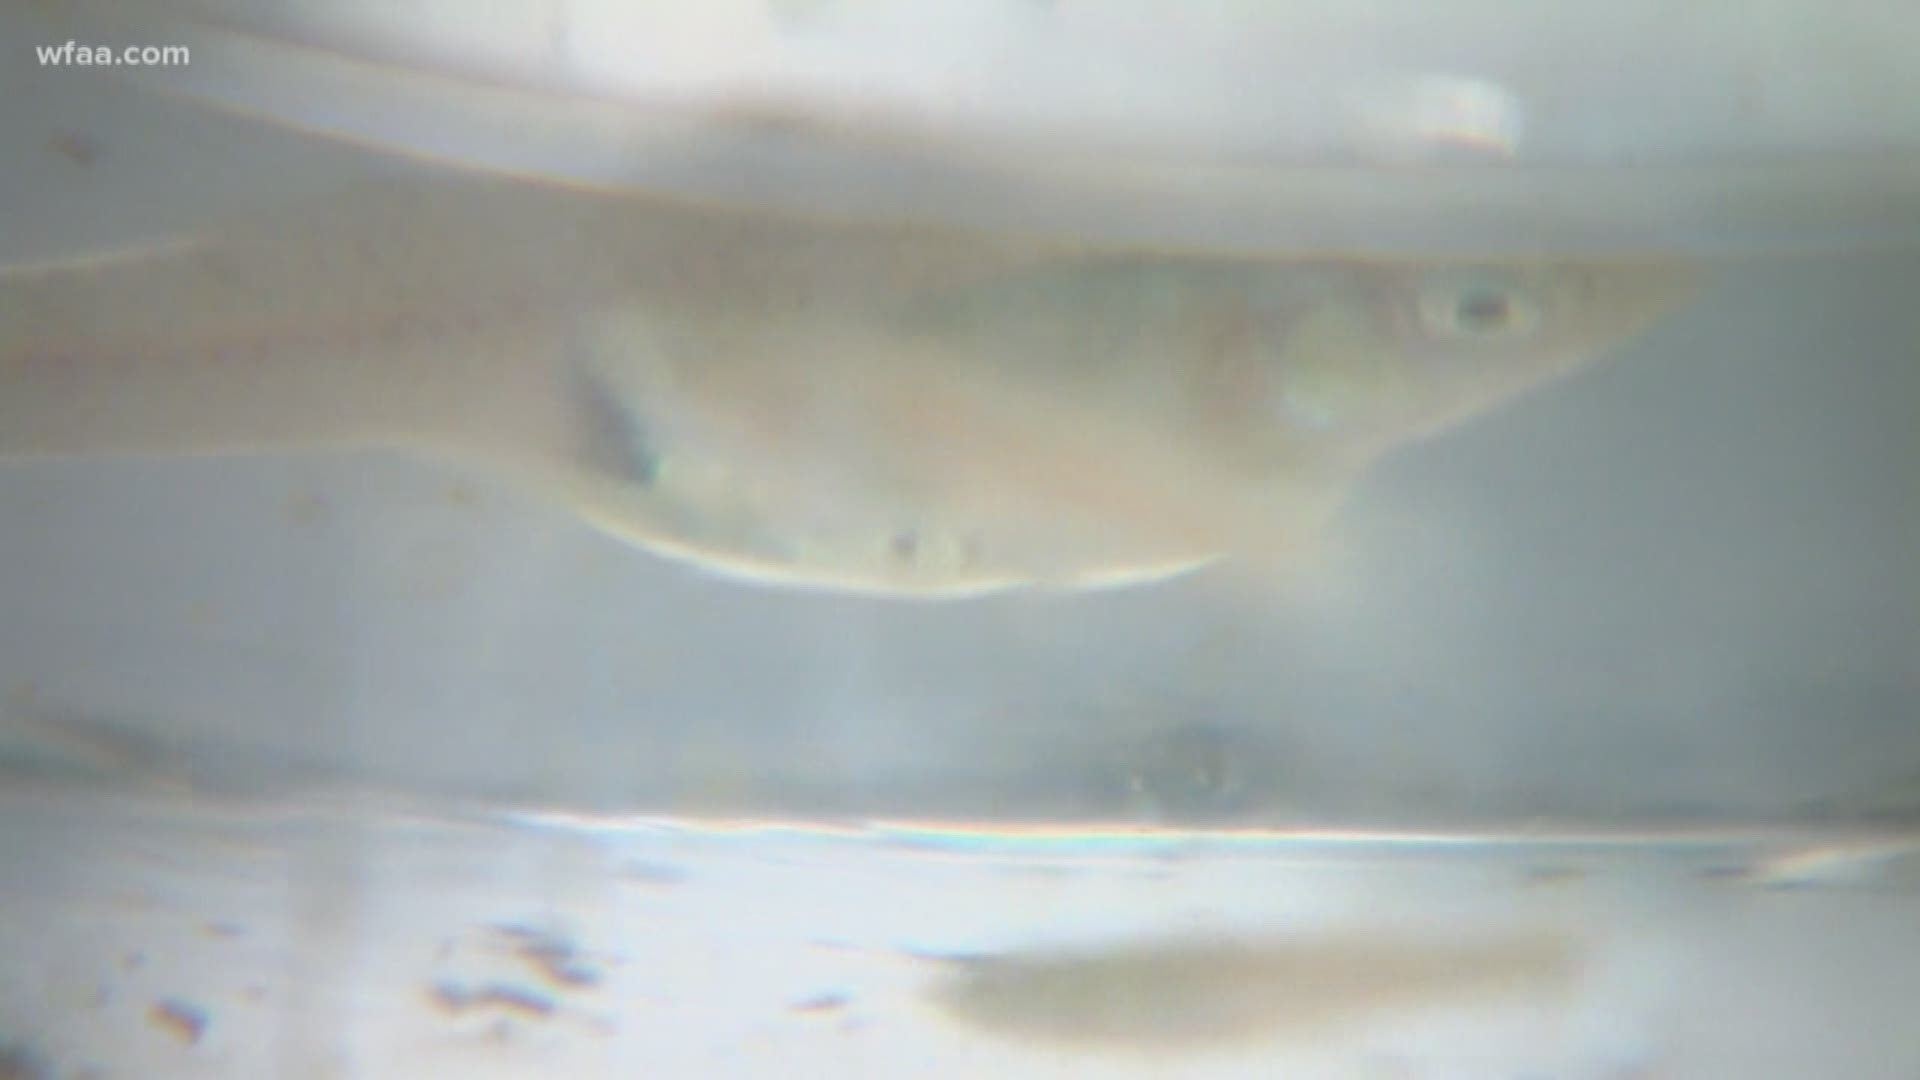 Southlake introduces gambusia fish to help combat mosquito population with natural predators